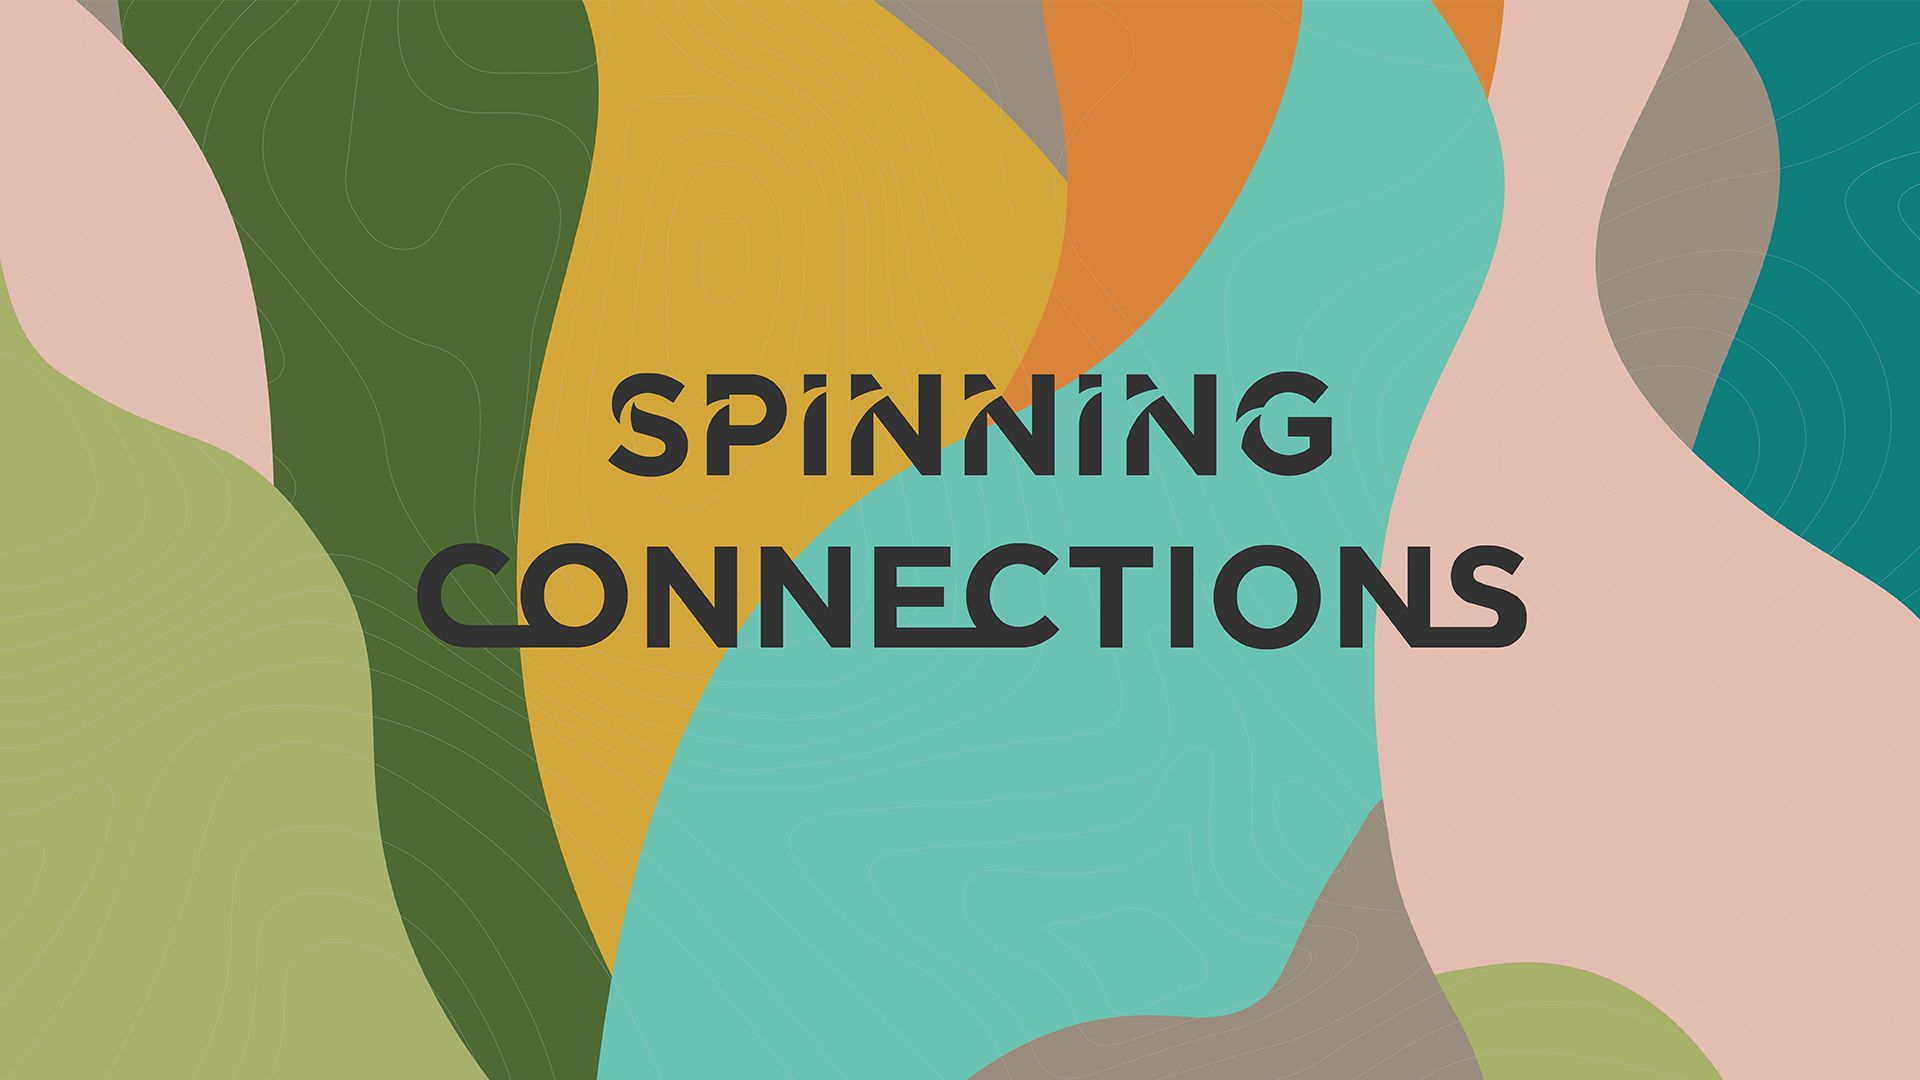 Spinning Connections